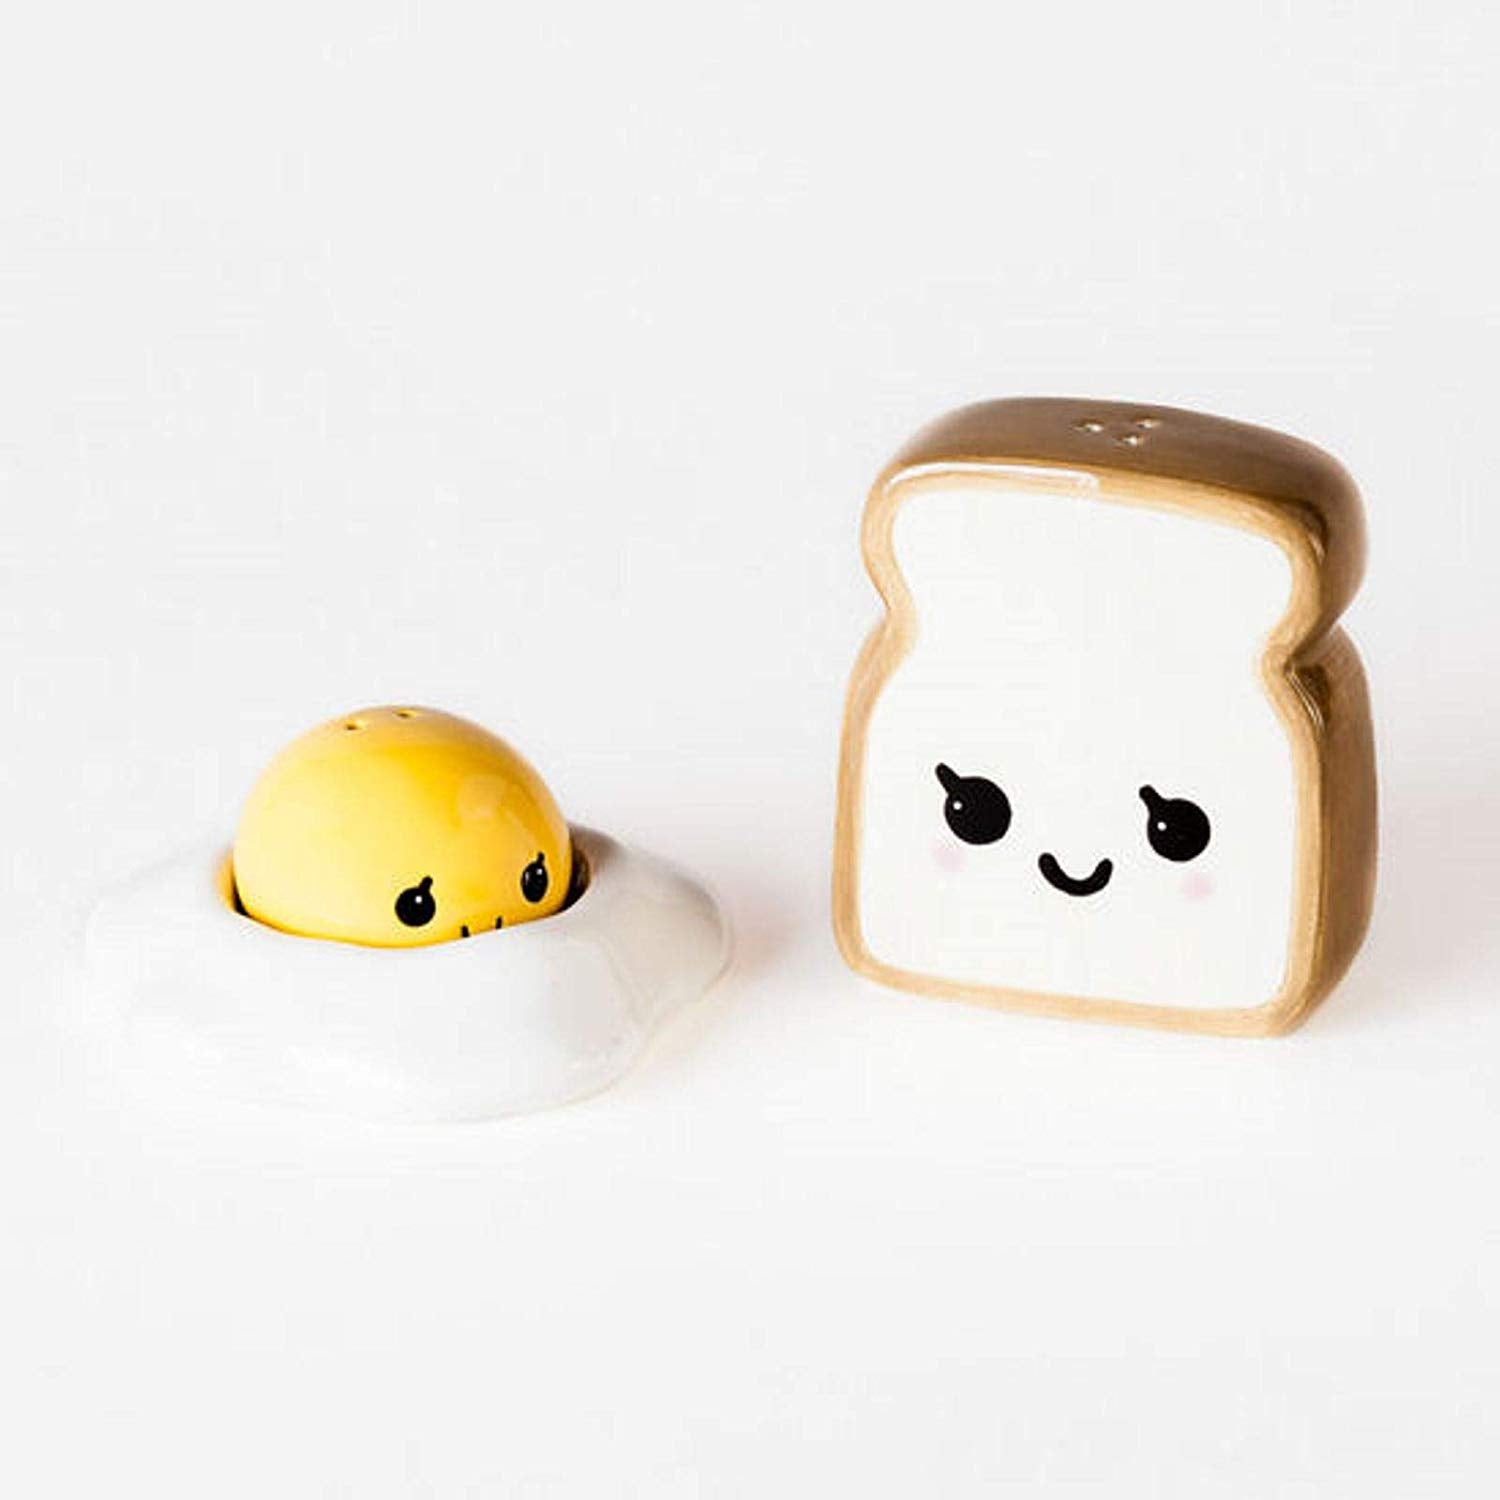 Egg and Toast Salt and Pepper Shakers - oddgifts.com